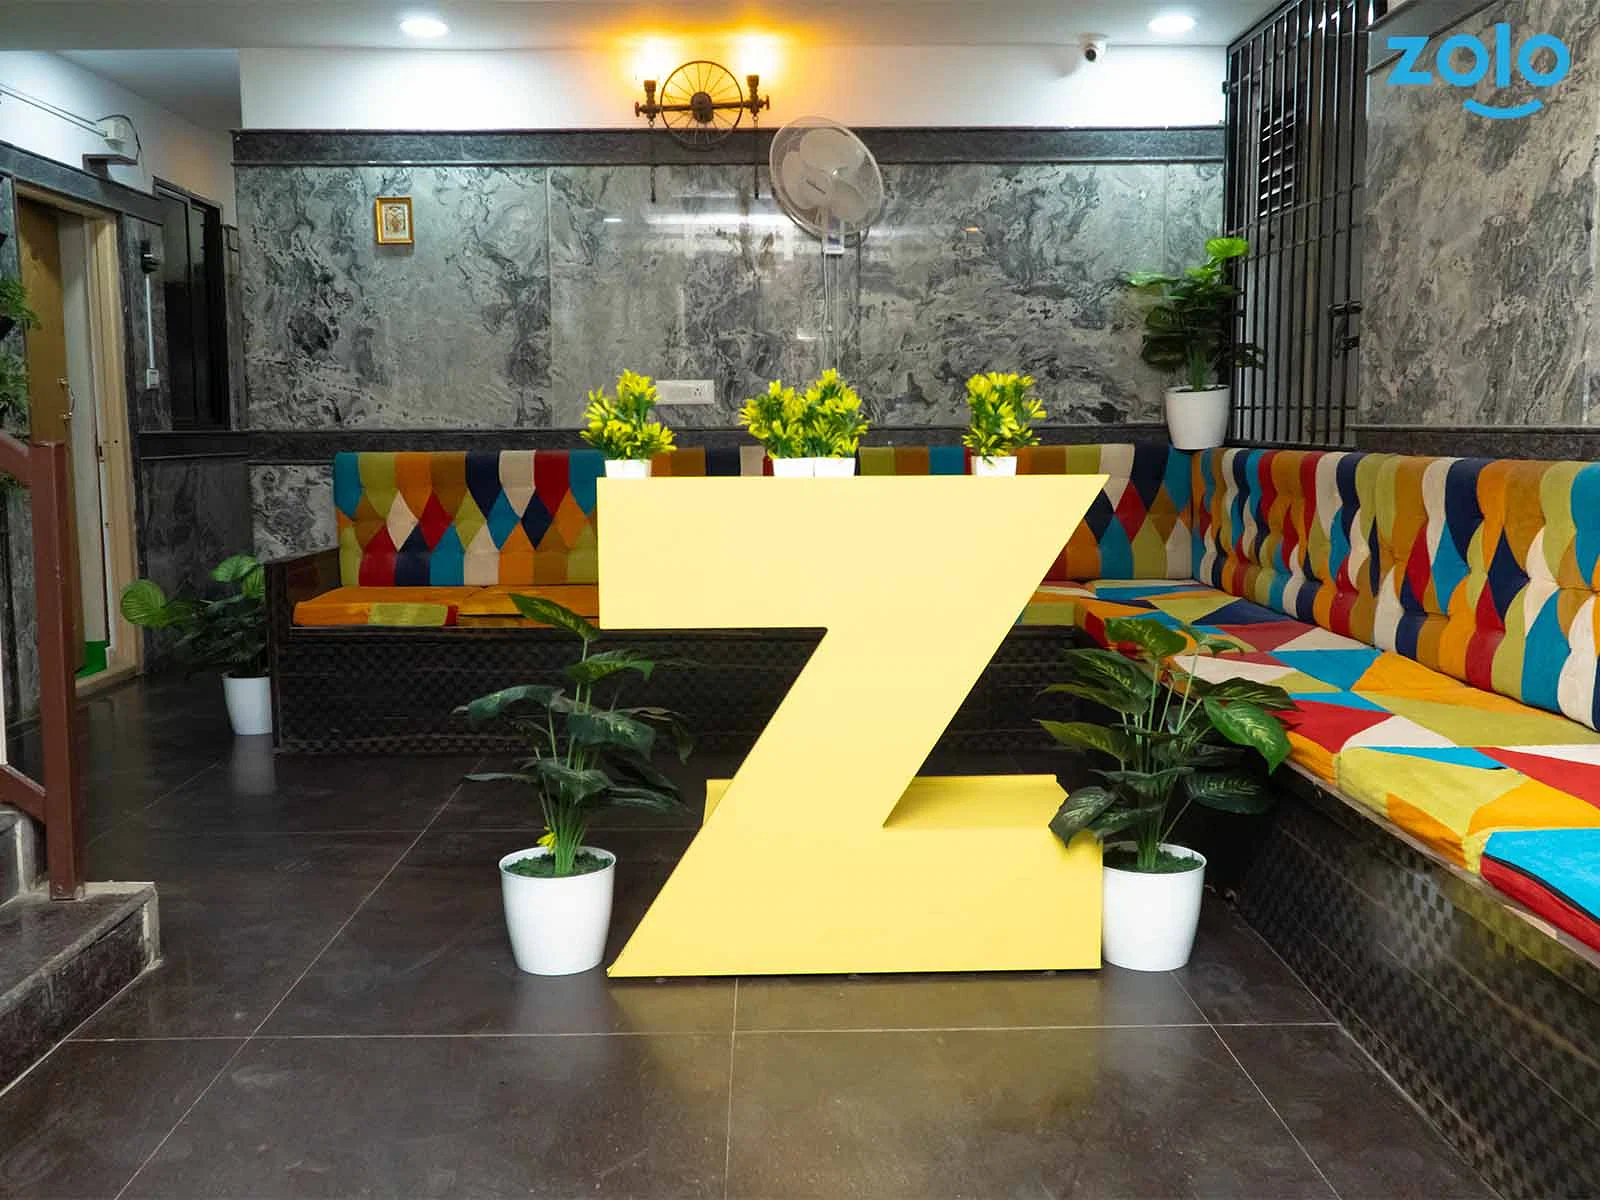 budget-friendly PGs and hostels for couple with single rooms with daily hopusekeeping-Zolo Highstreet F